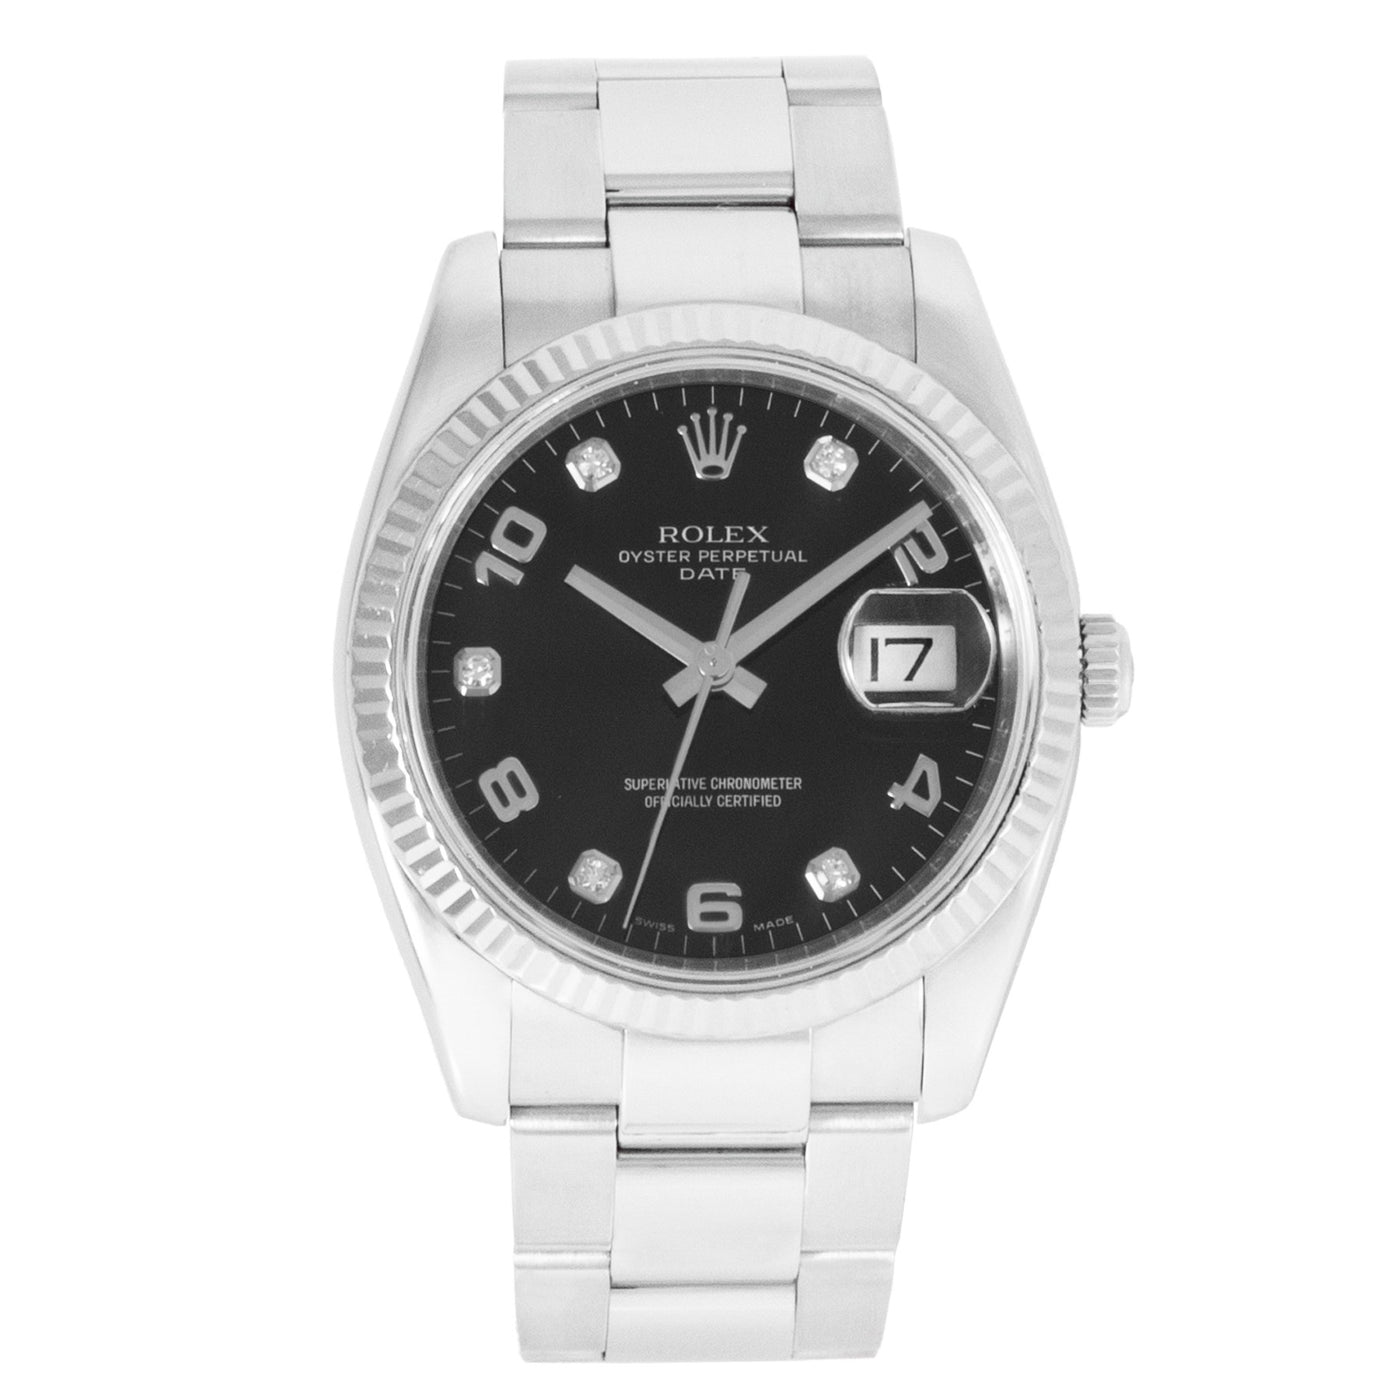 Rolex Oyster Perpetual Date 115234 | Timepiece360